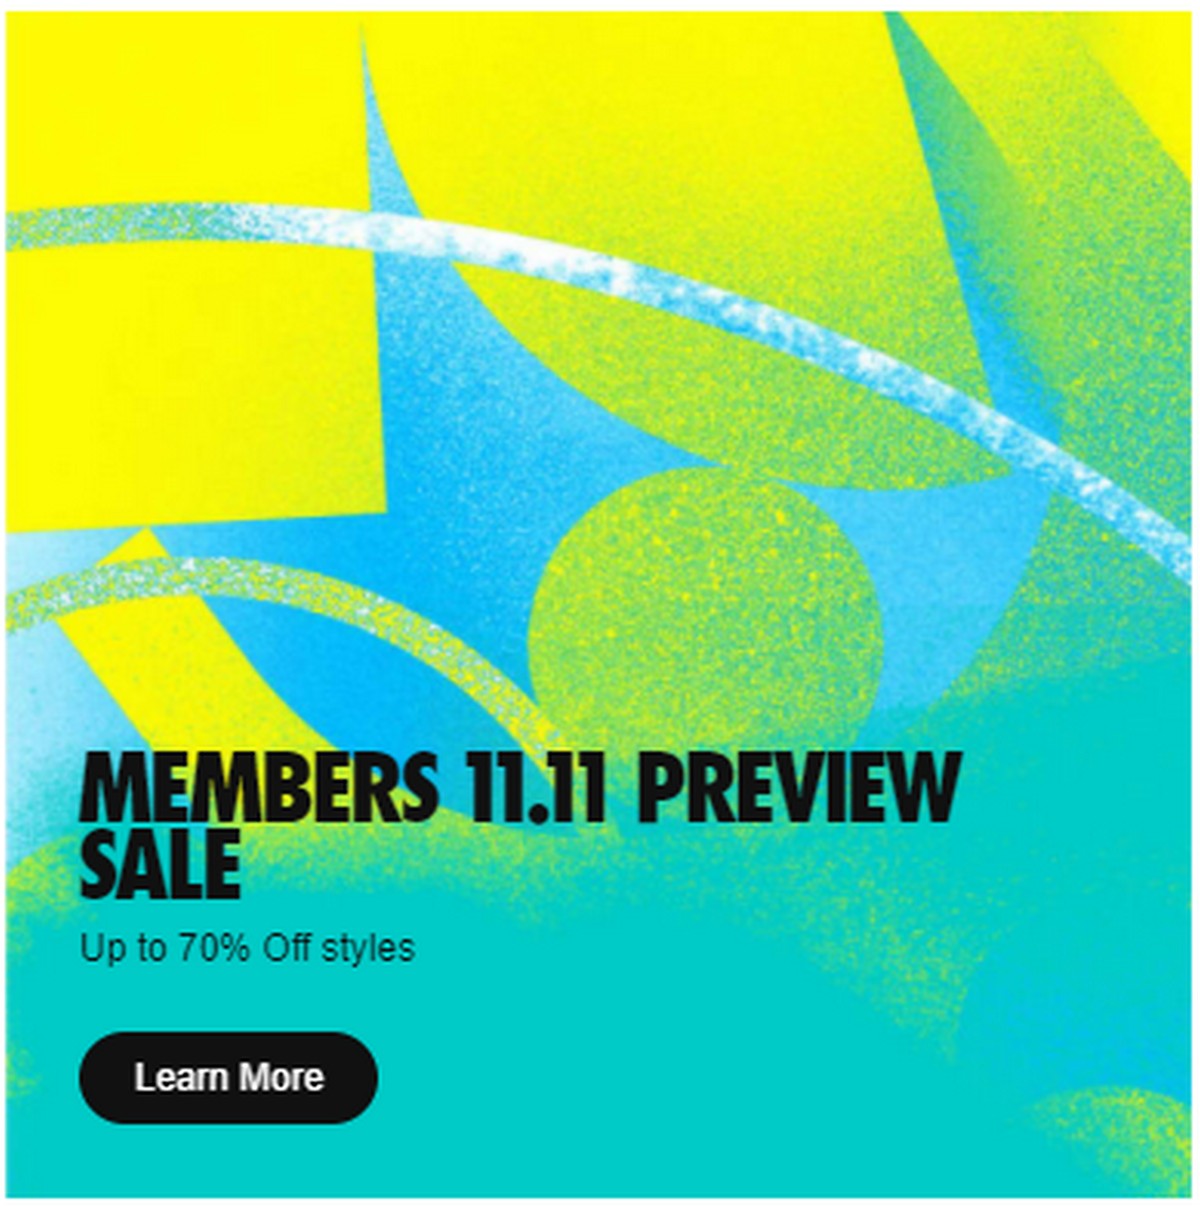 nike-1111-preview-sale-2 - LifeStyle 